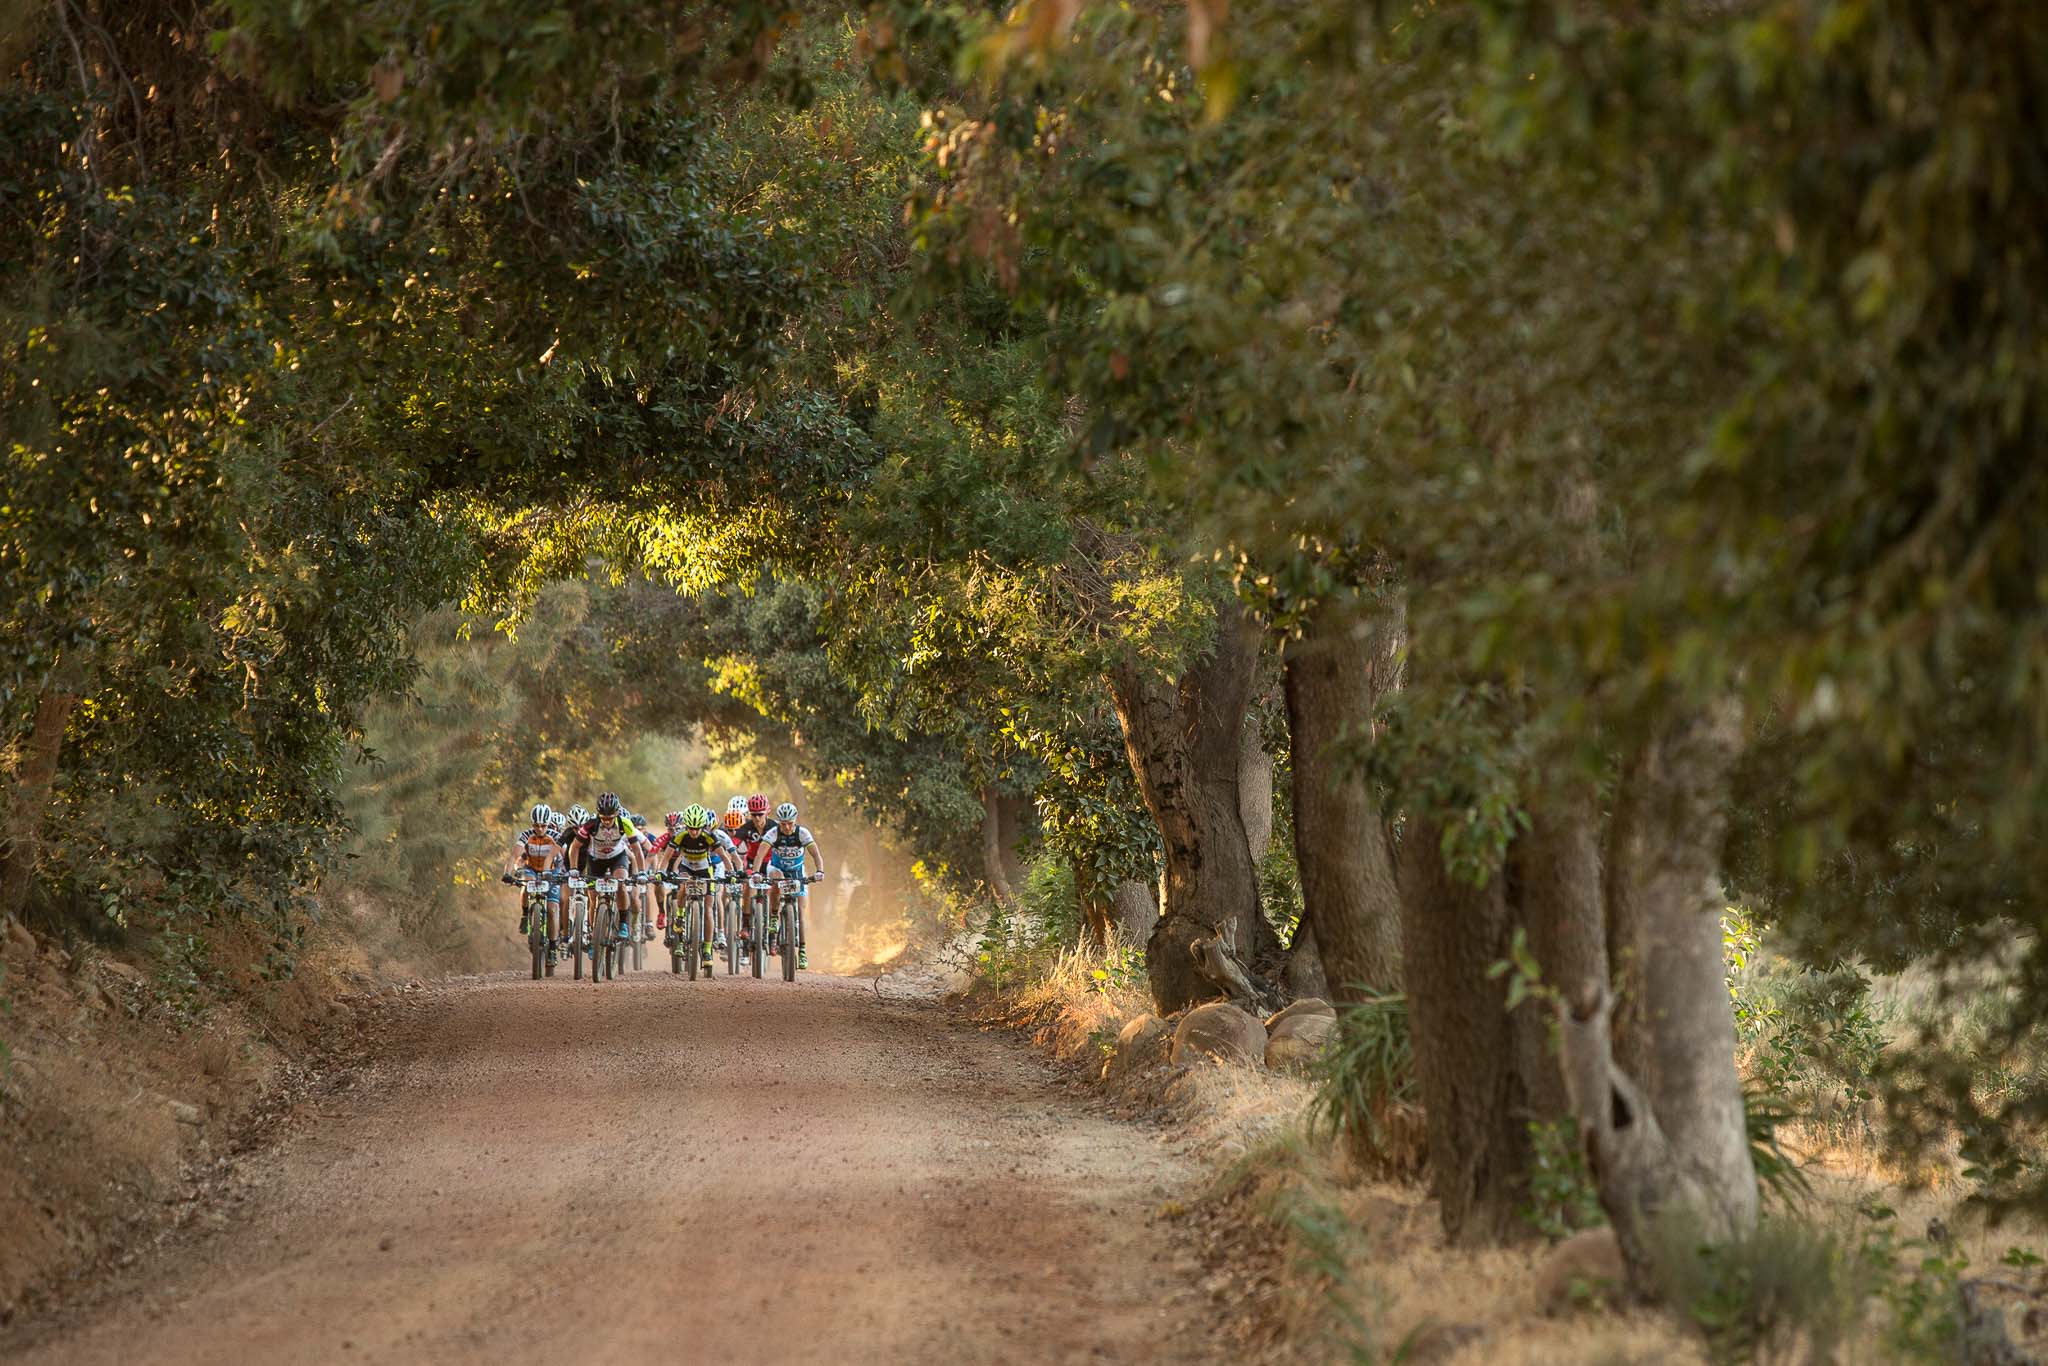 The ladies peloton during stage 1 of the 2016 Absa Cape Epic Mountain Bike stage race held from Saronsberg Wine Estate in Tulbagh, South Africa on the 14th March 2016 Photo by Sam Clark/Cape Epic/SPORTZPICS PLEASE ENSURE THE APPROPRIATE CREDIT IS GIVEN TO THE PHOTOGRAPHER AND SPORTZPICS ALONG WITH THE ABSA CAPE EPIC {ace2016}